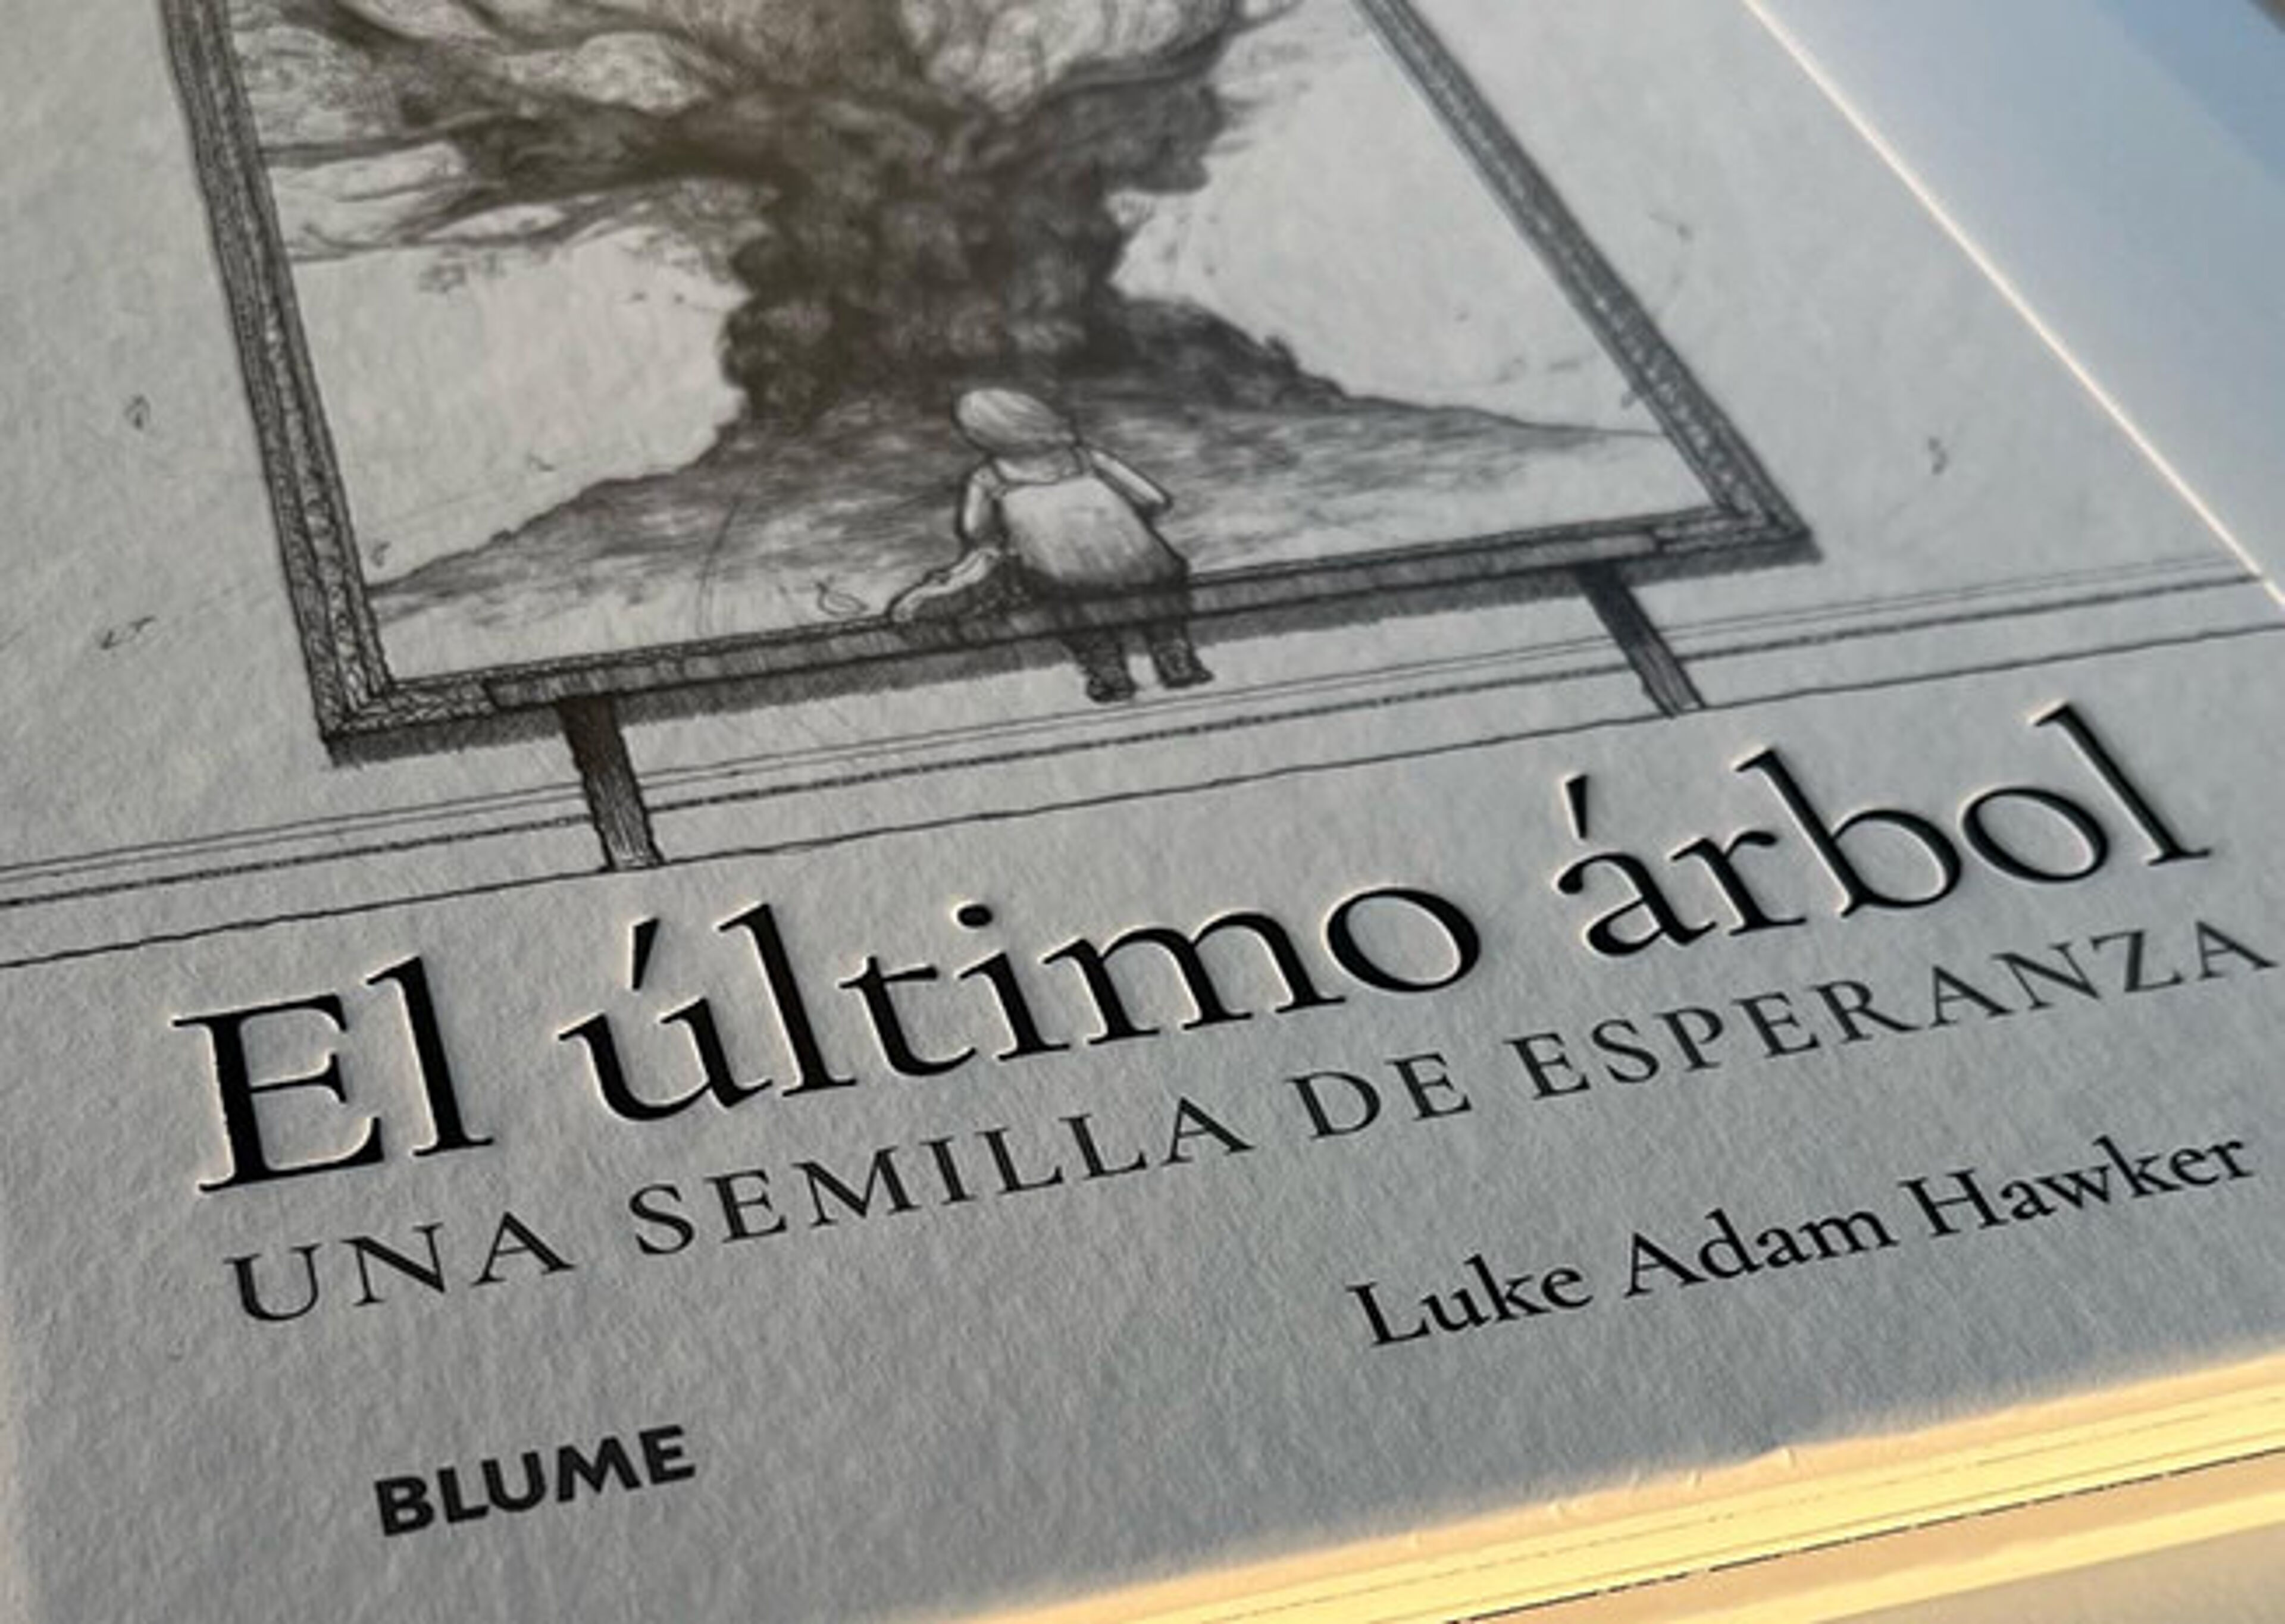 Detail of the book "El último árbol" featuring an illustration of a tree and a person, with the subtitle "UNA SEMILLA DE ESPERANZA" and the author's name, Luke Adam Hawker.